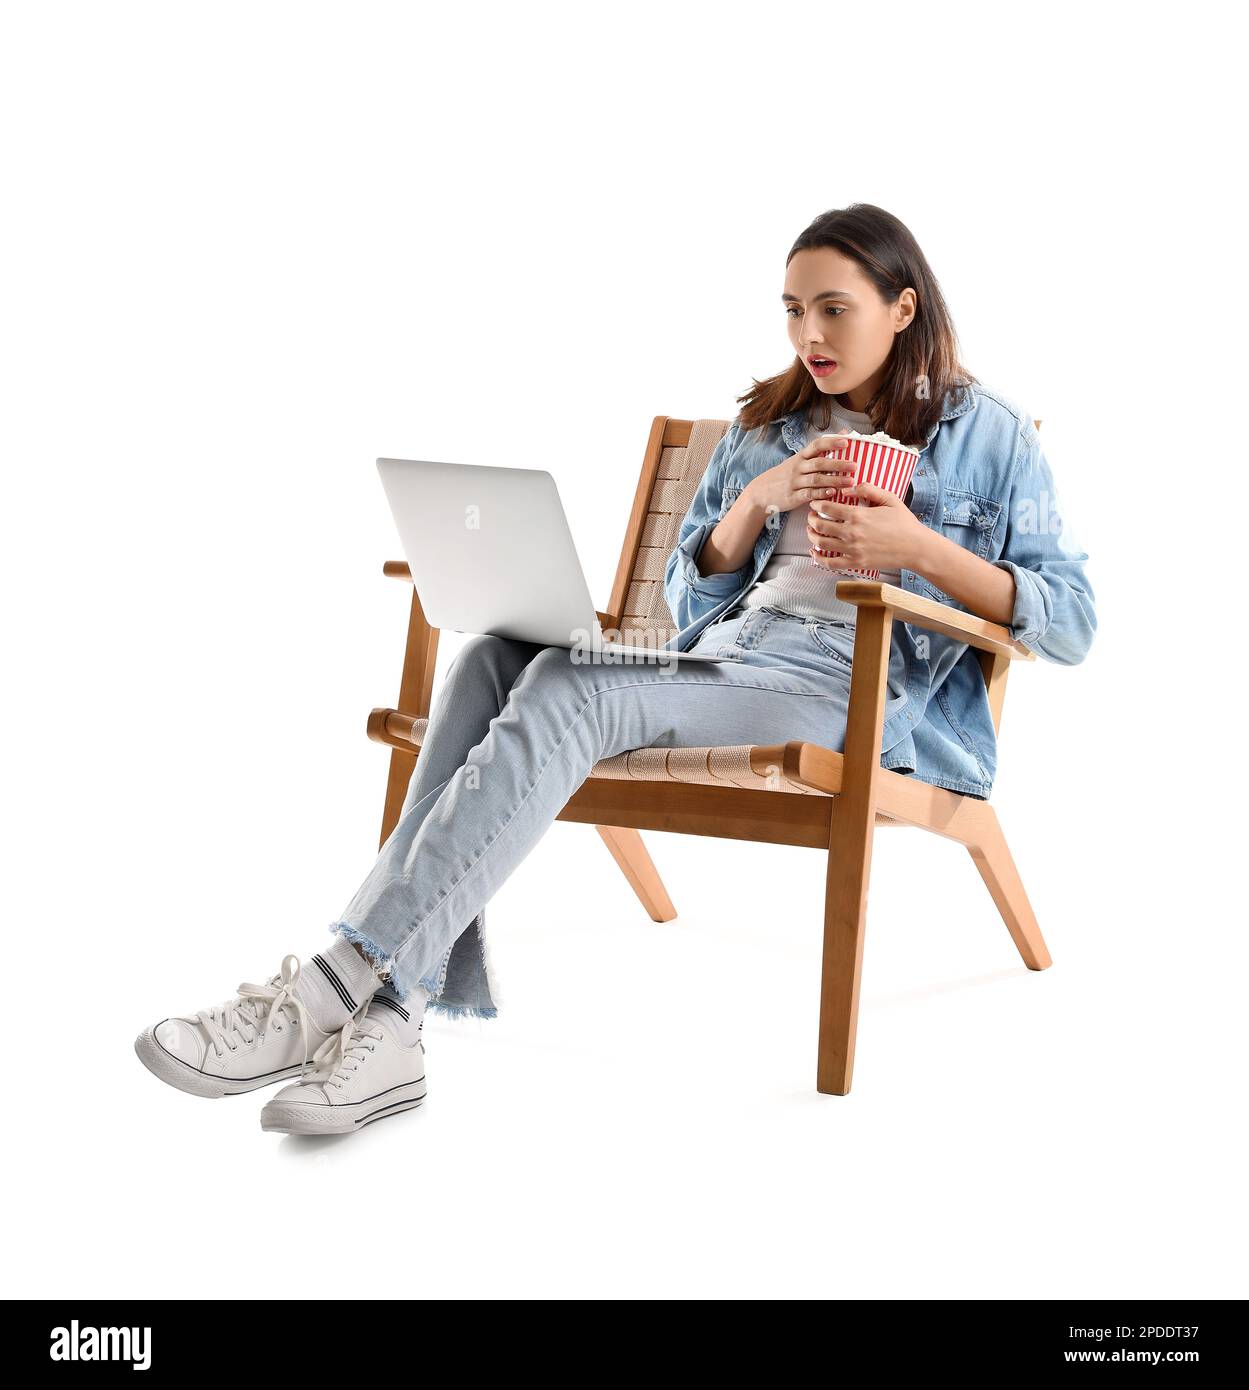 Shocked young woman with popcorn and laptop watching video in armchair on white background Stock Photo